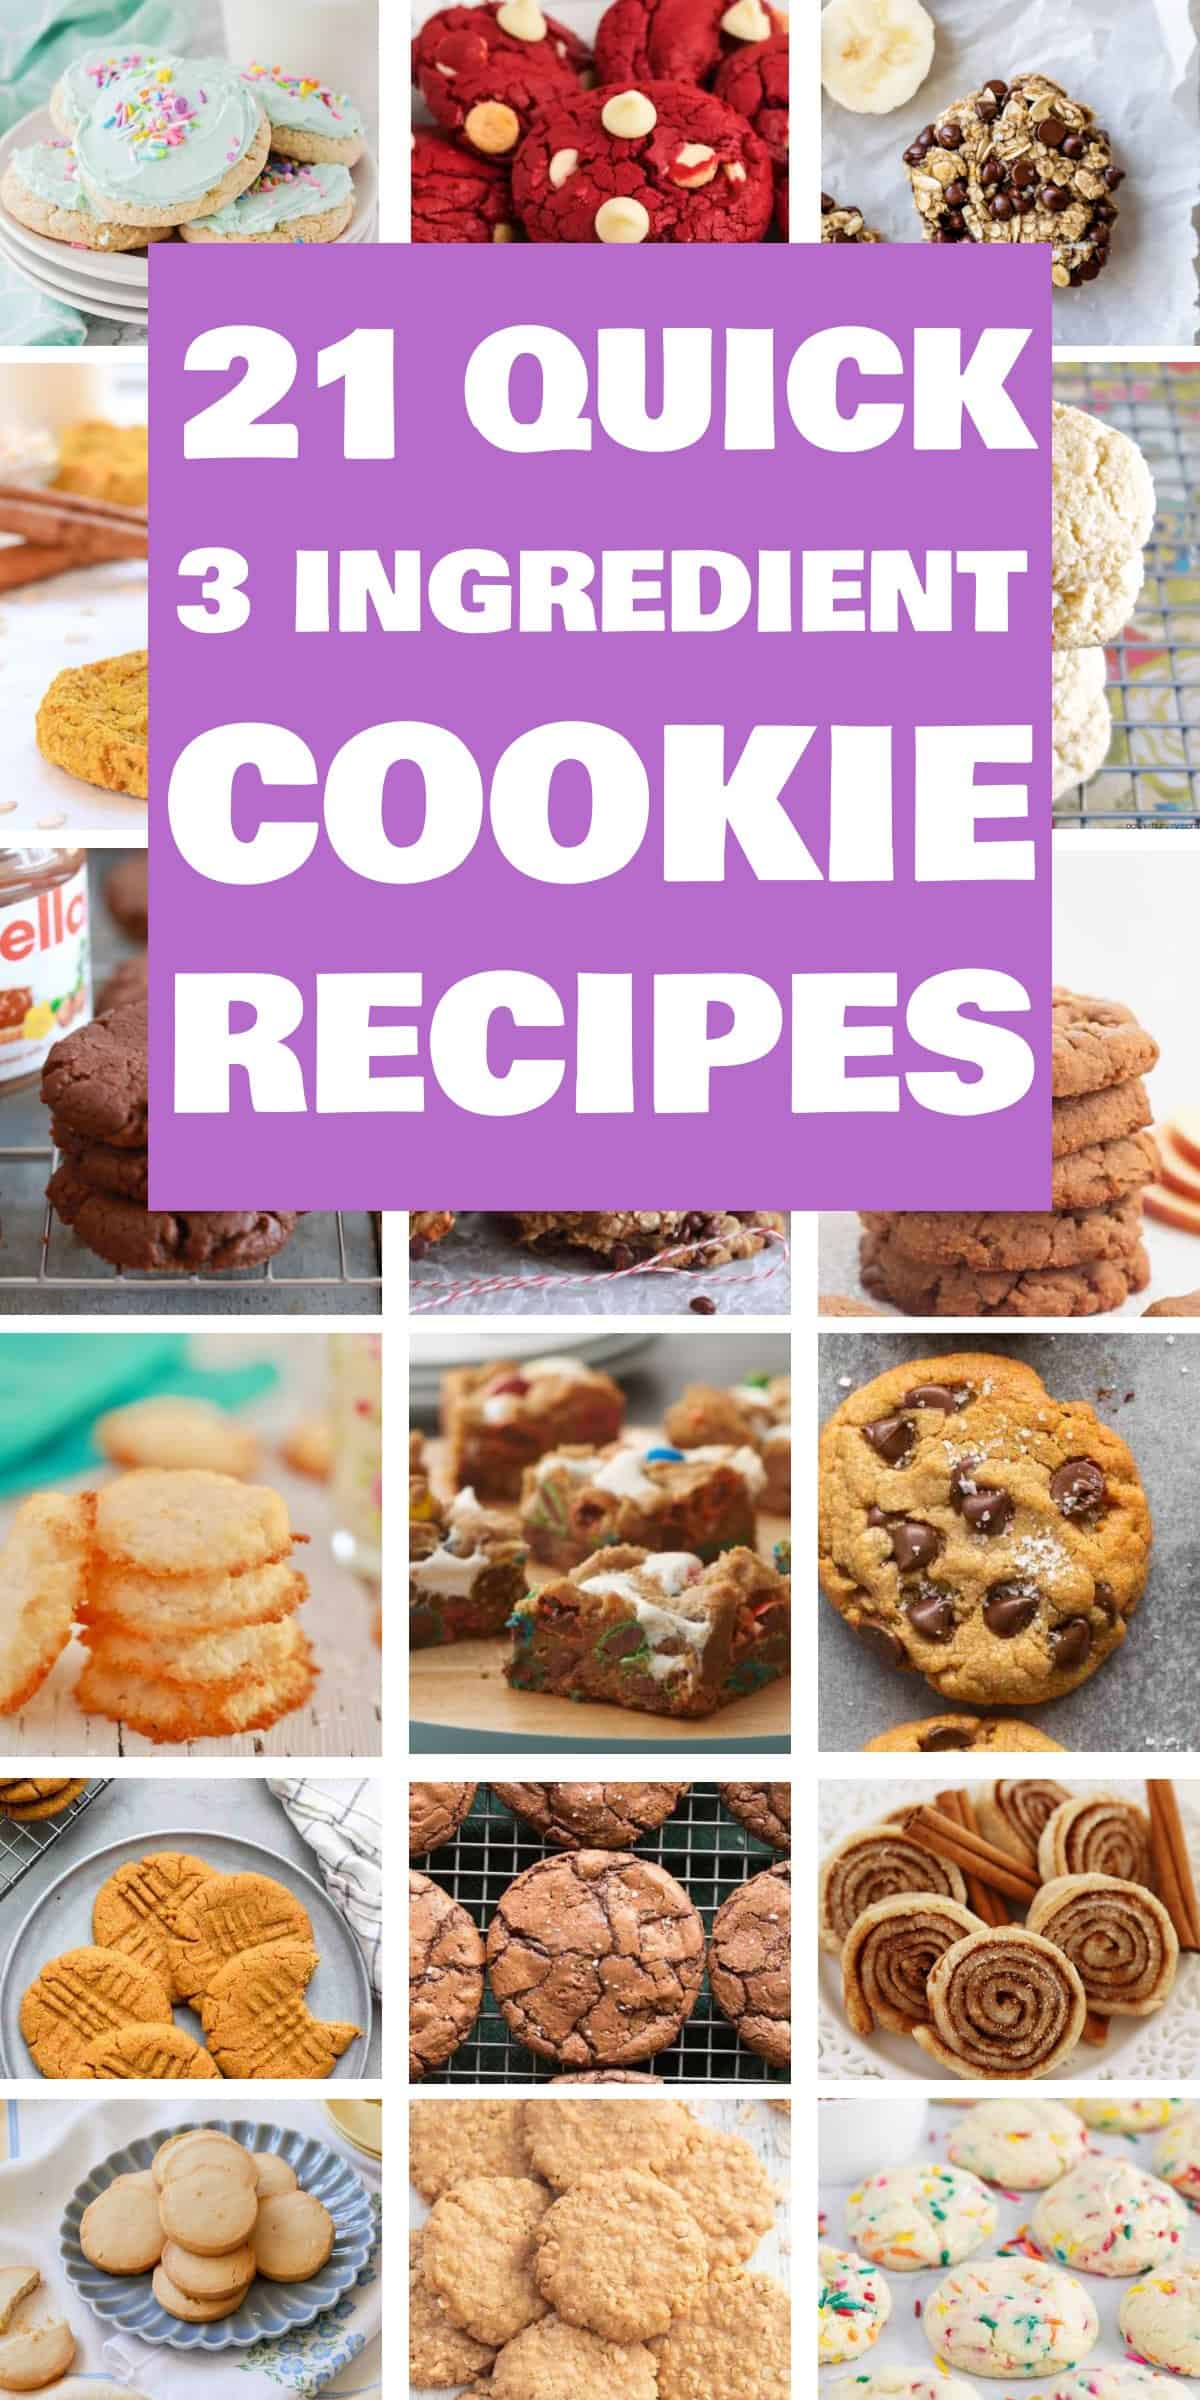 21 Quick and Easy 3 Ingredient Cookie Recipes